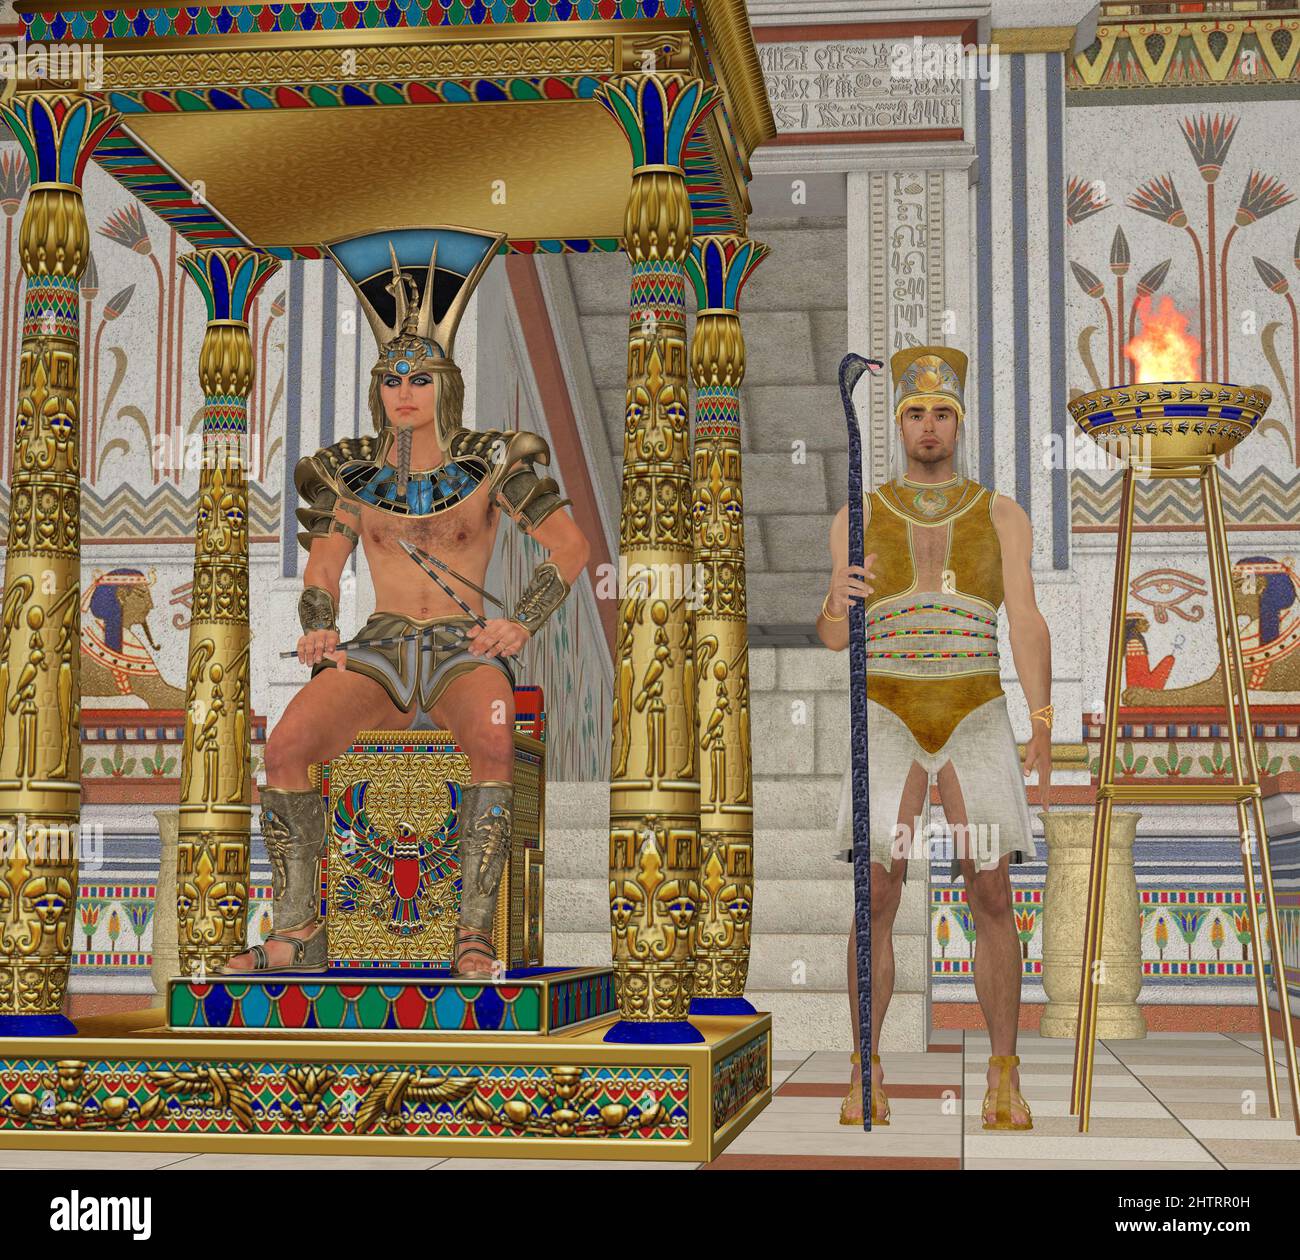 An Egyptian Pharaoh sits on a throne in Egypt with a guard beside him for protection. Stock Photo